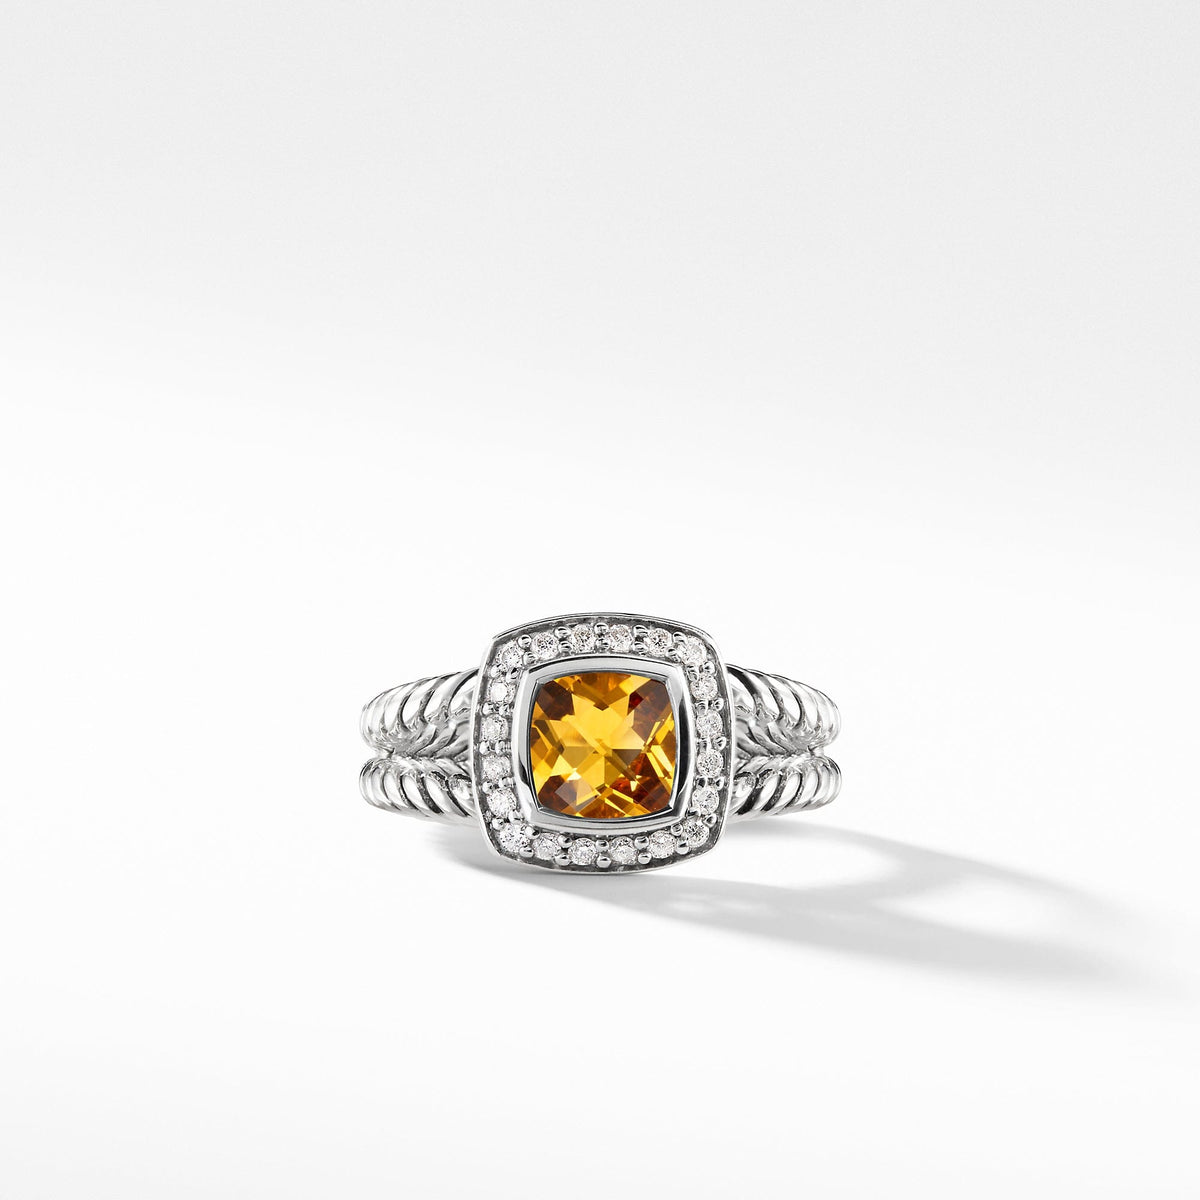 Petite Albion Ring with Citrine and Diamonds